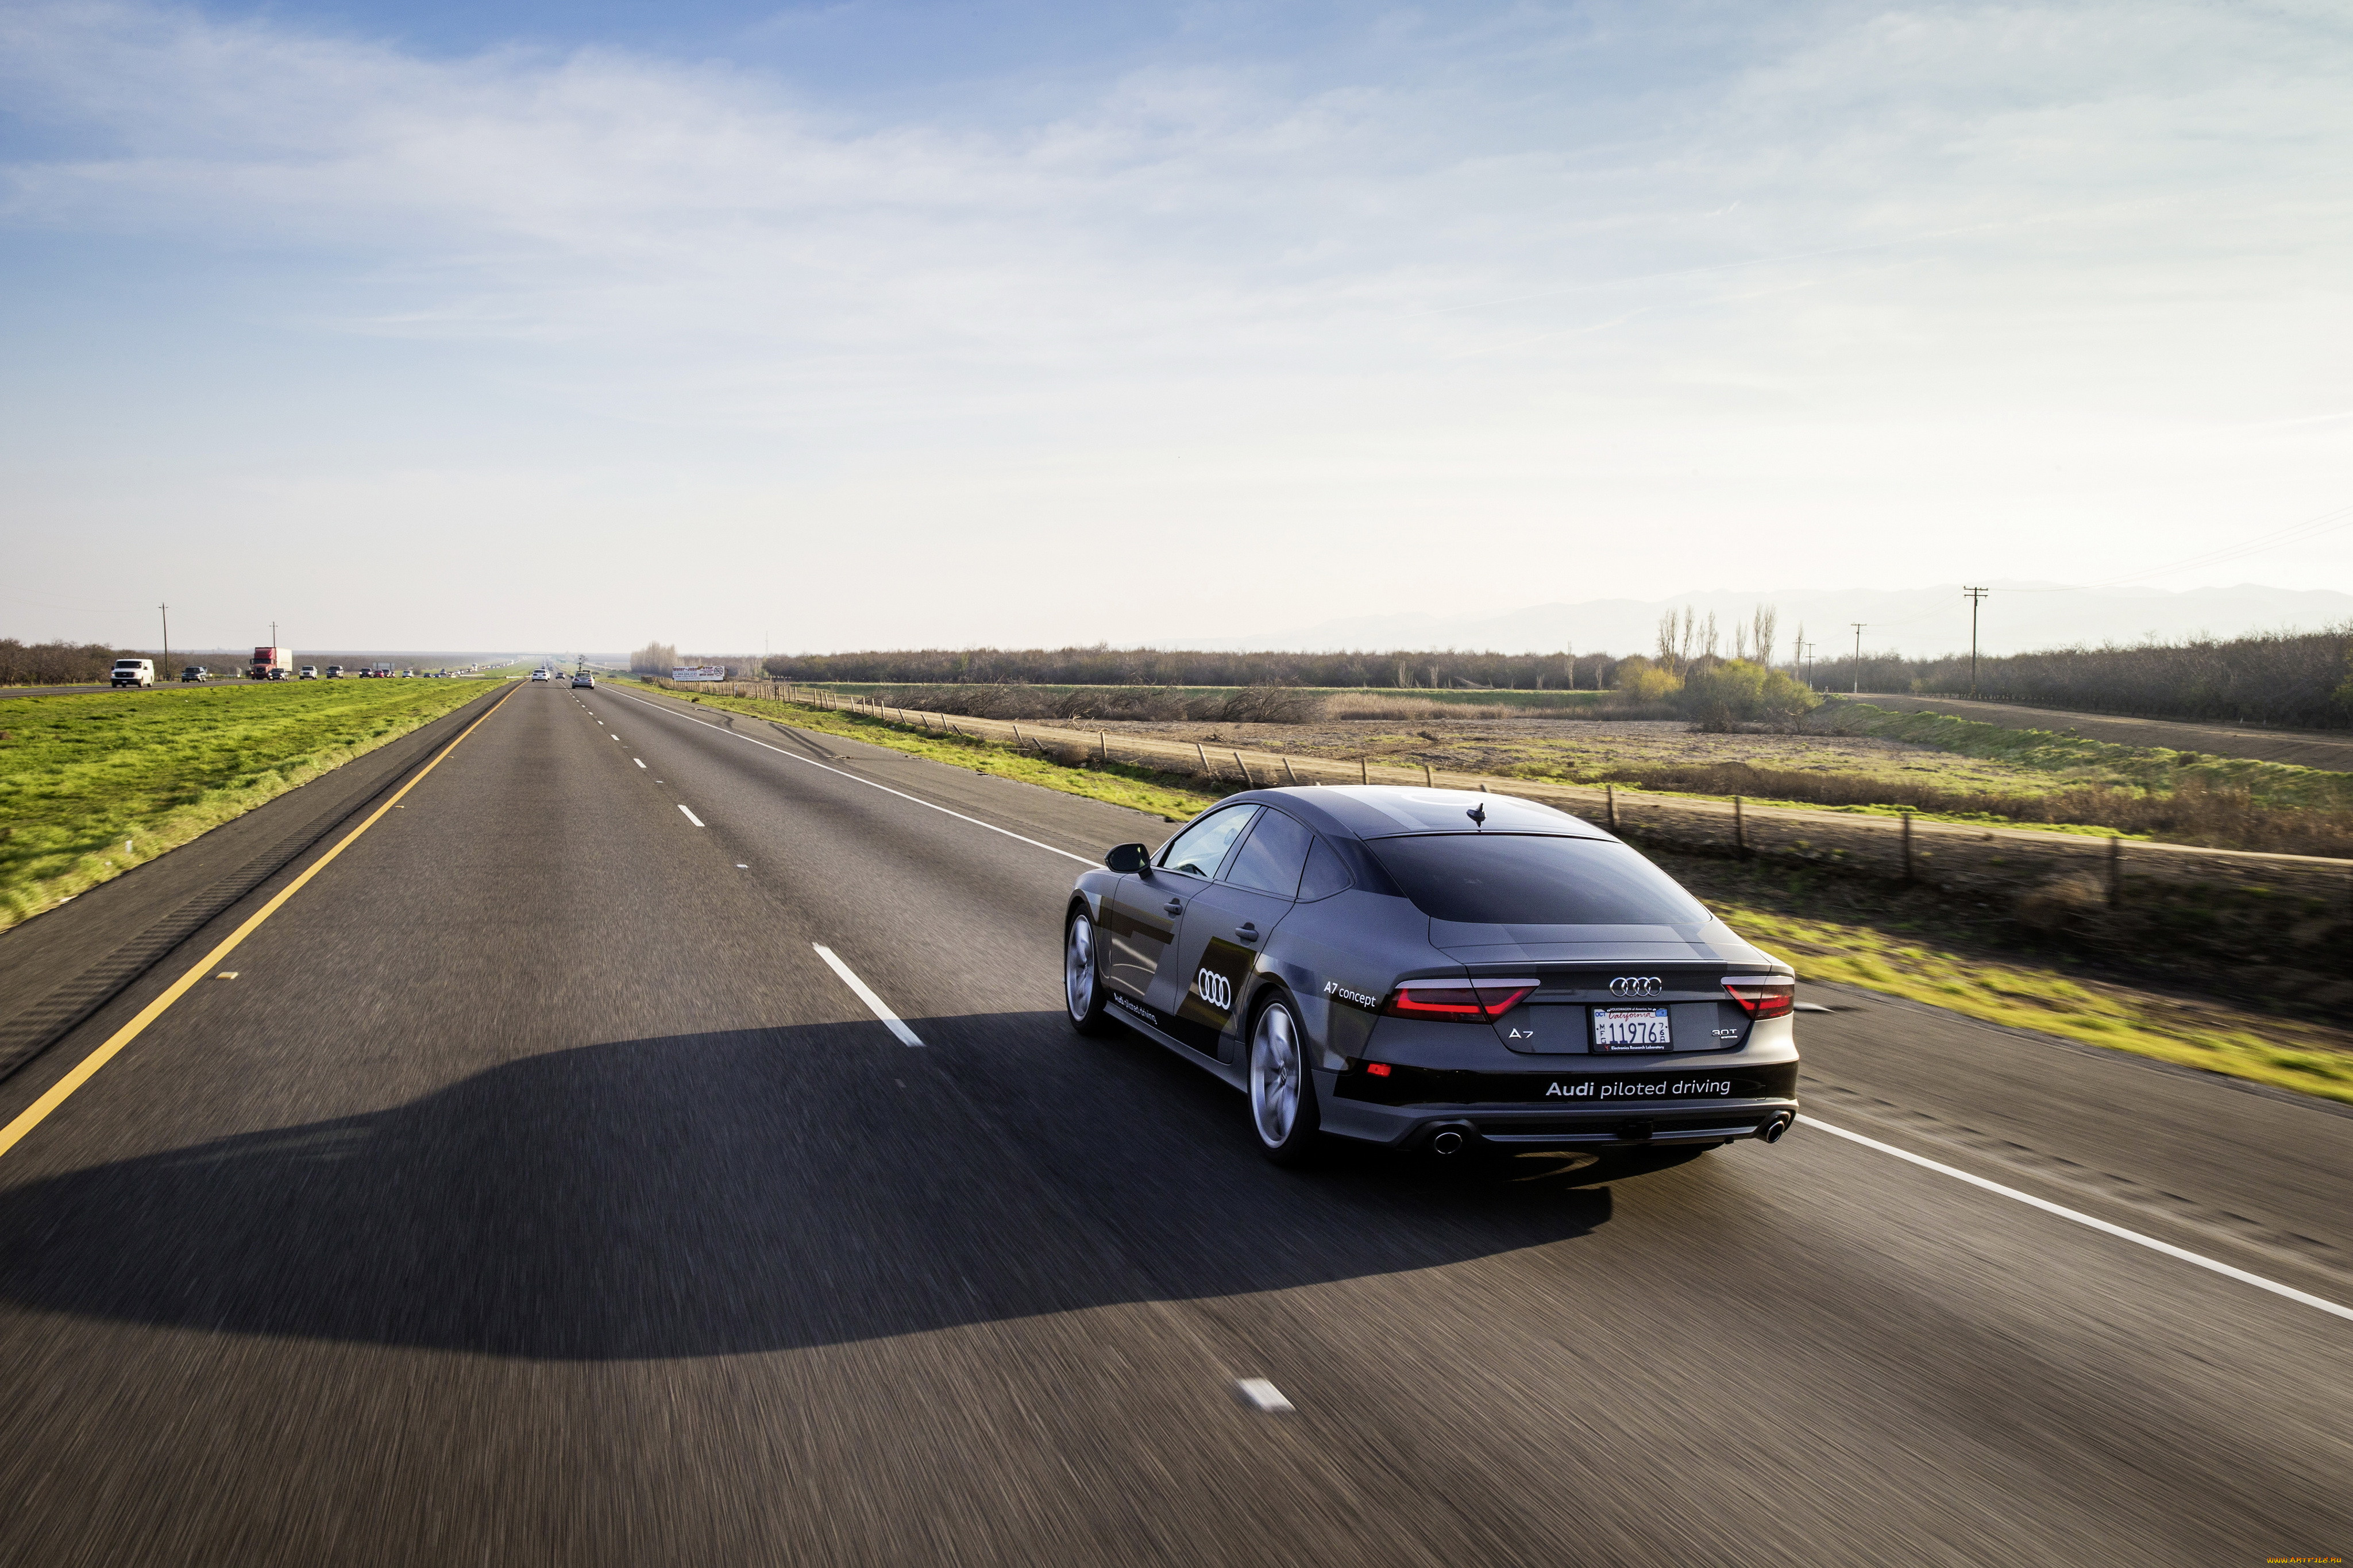 , audi, concept, driving, piloted, 2015, sportback, a7